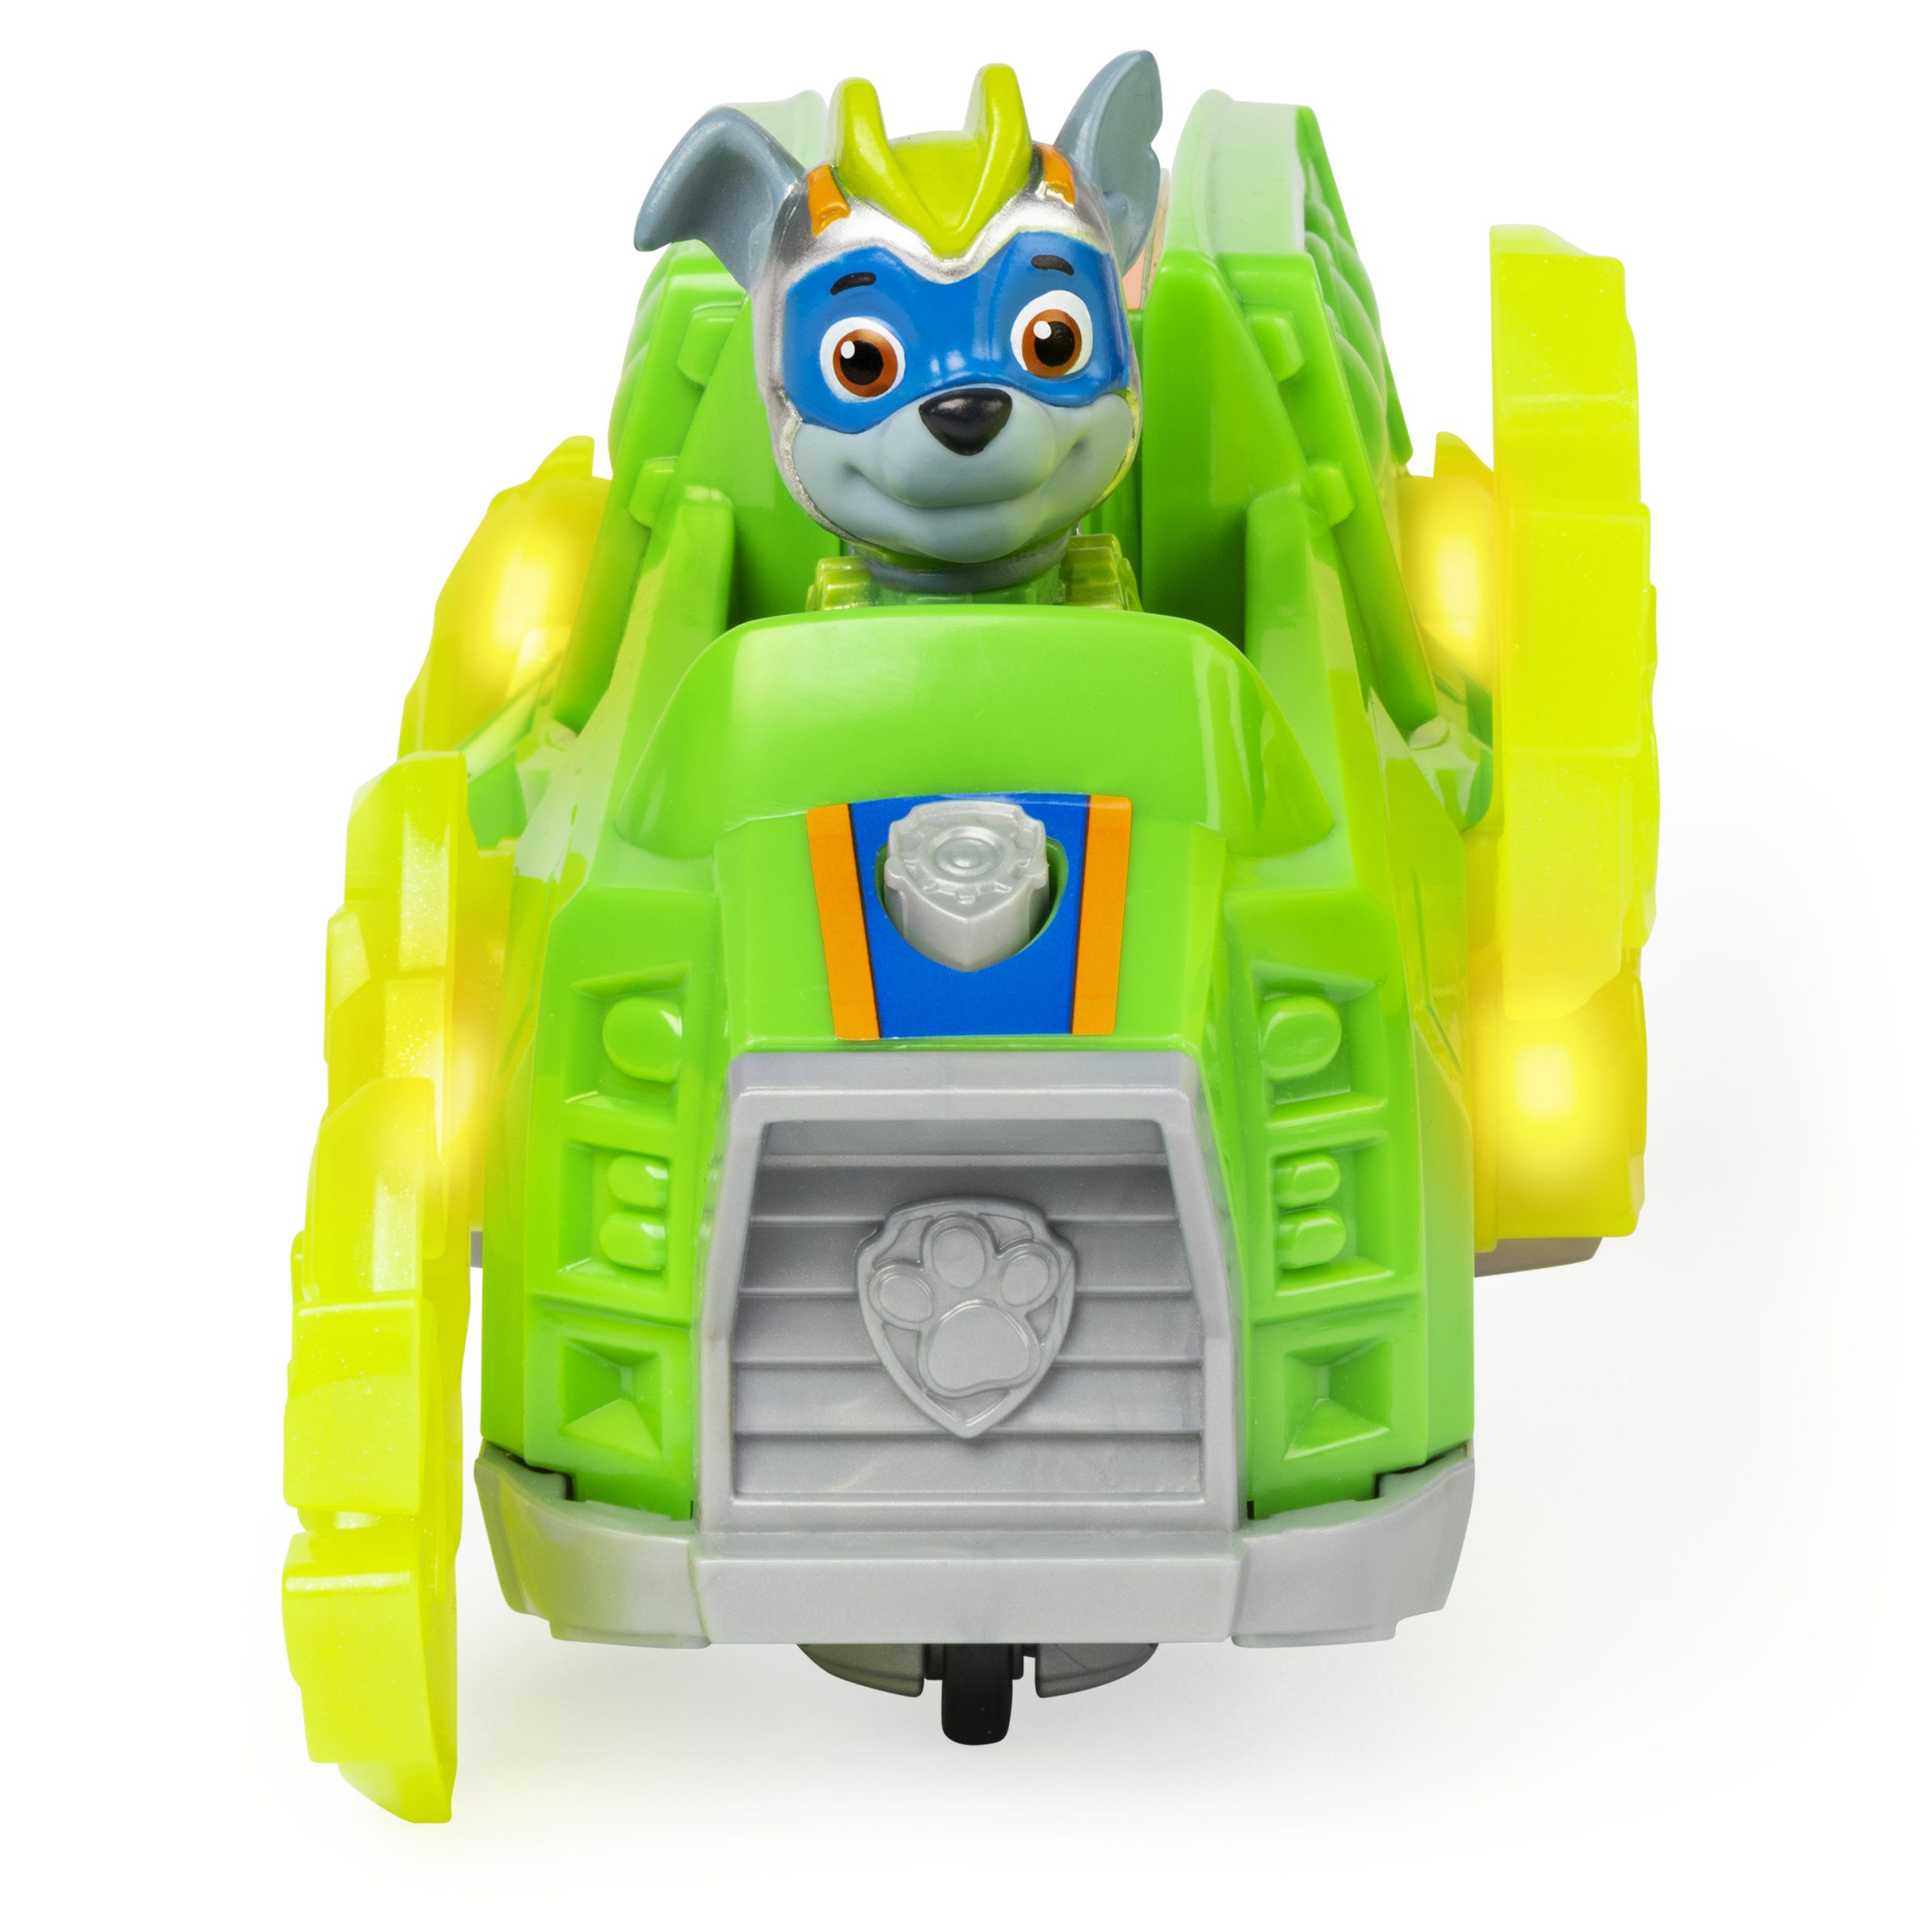 Paw patrol οχήματα deluxe charged up 6055753 - PAW PATROL